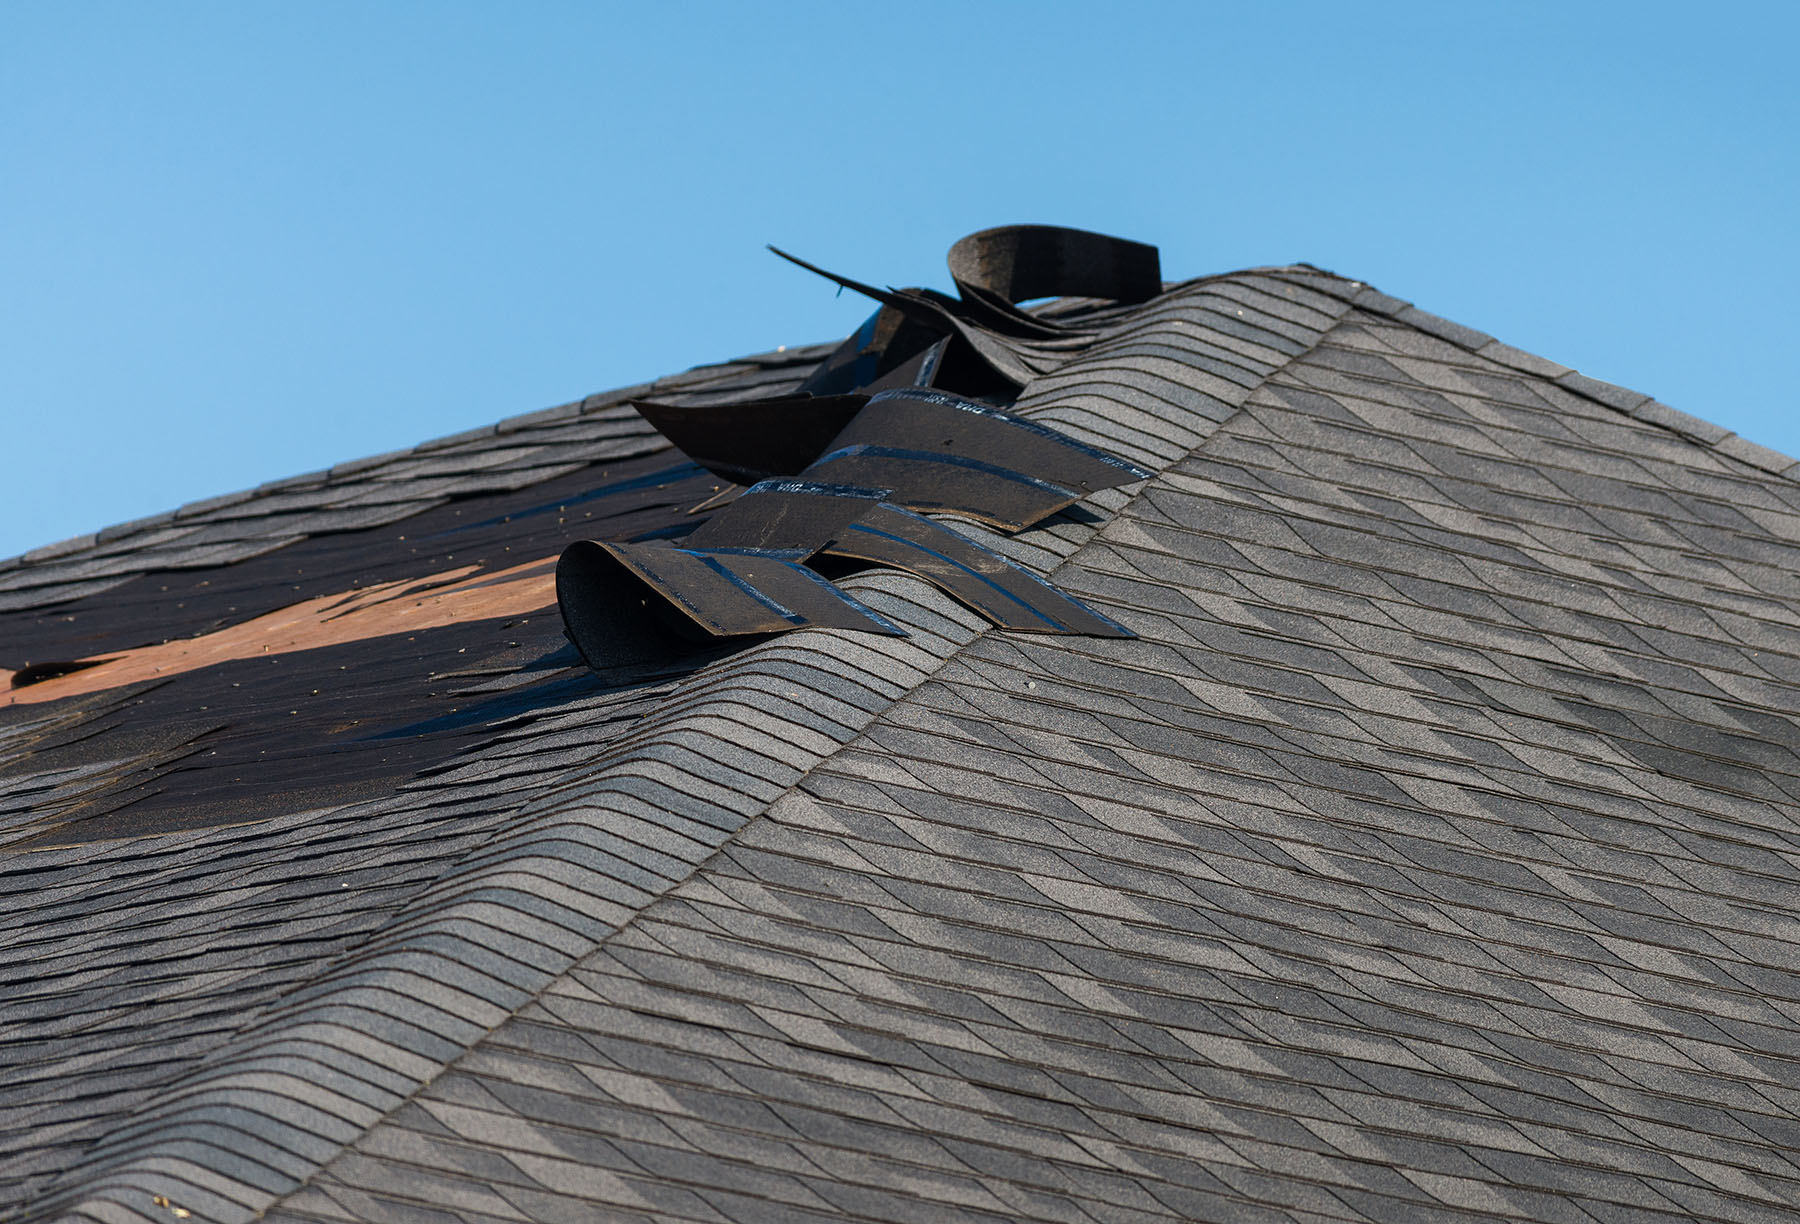 T2K Roofing Temple, US, fascia roofing